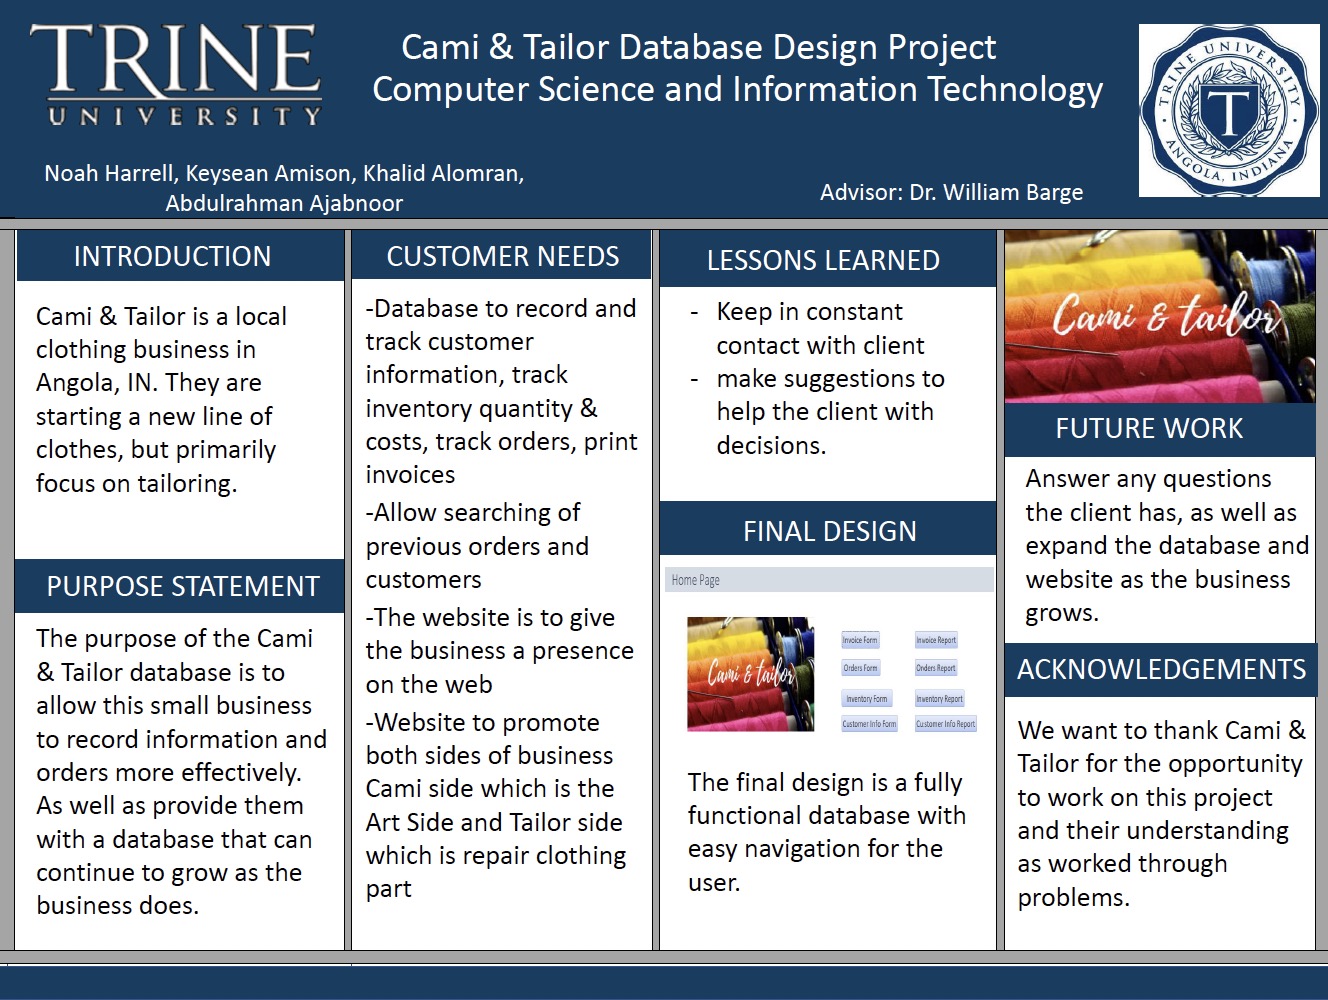 Cami & Tailor Database Design Project